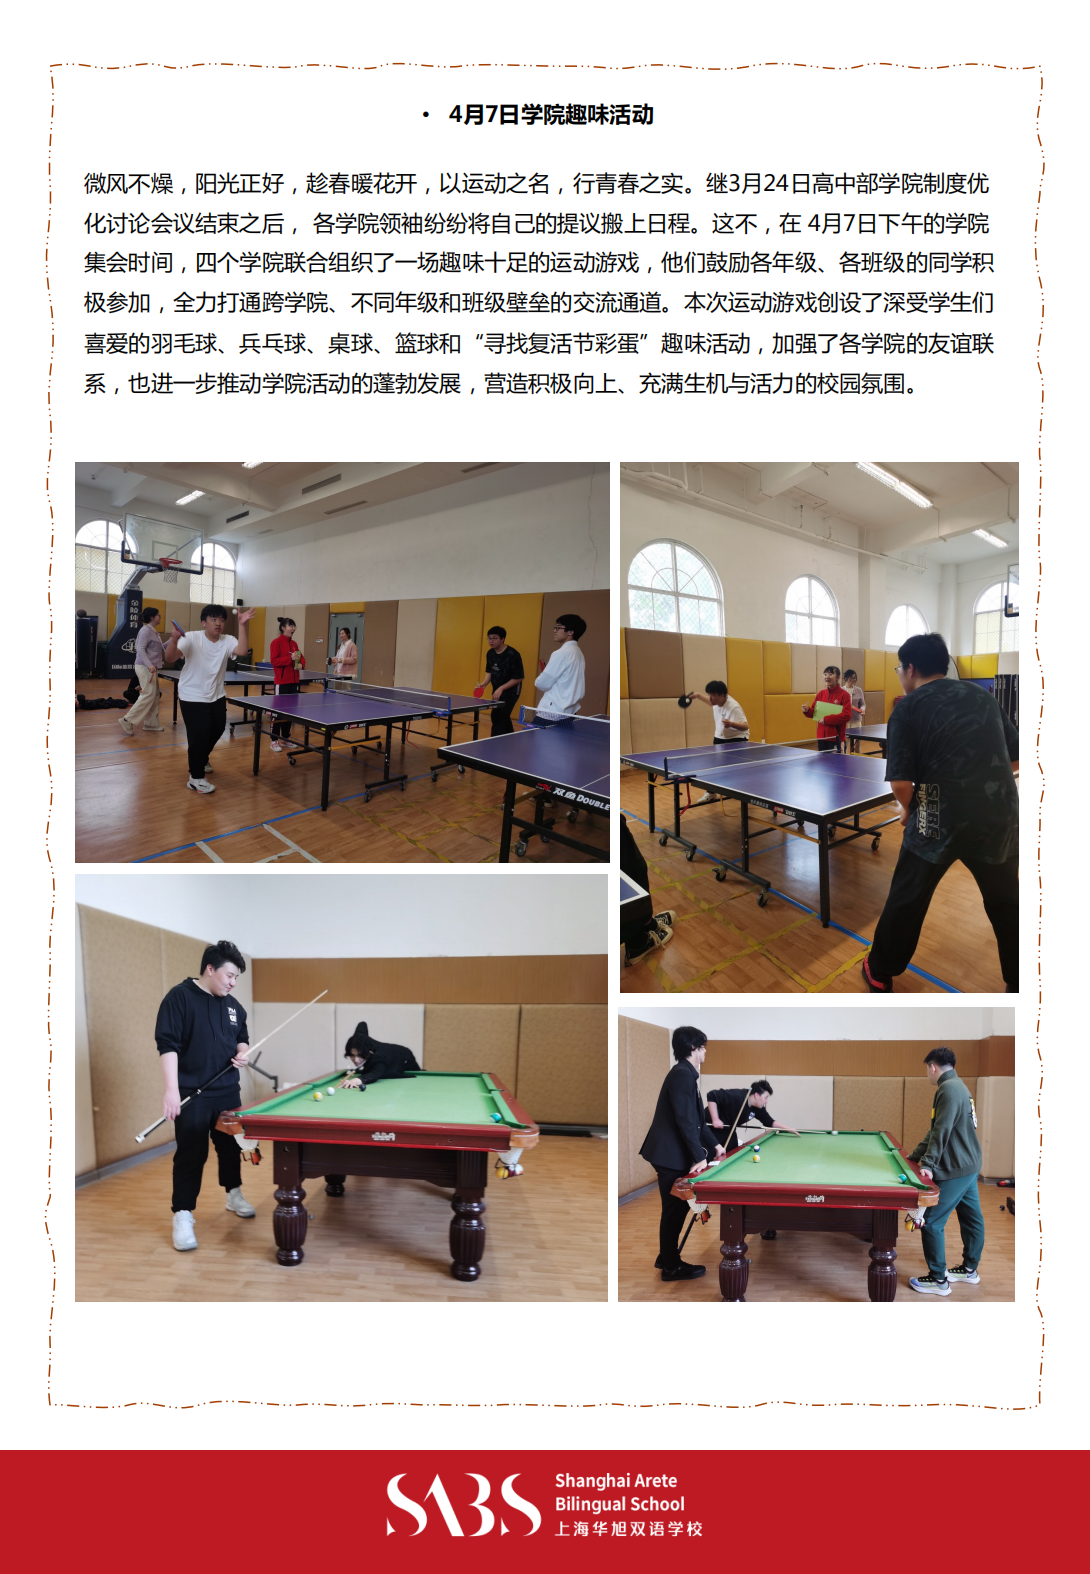 HS 4th Issue Newsletter pptx（Chinese）_16.png